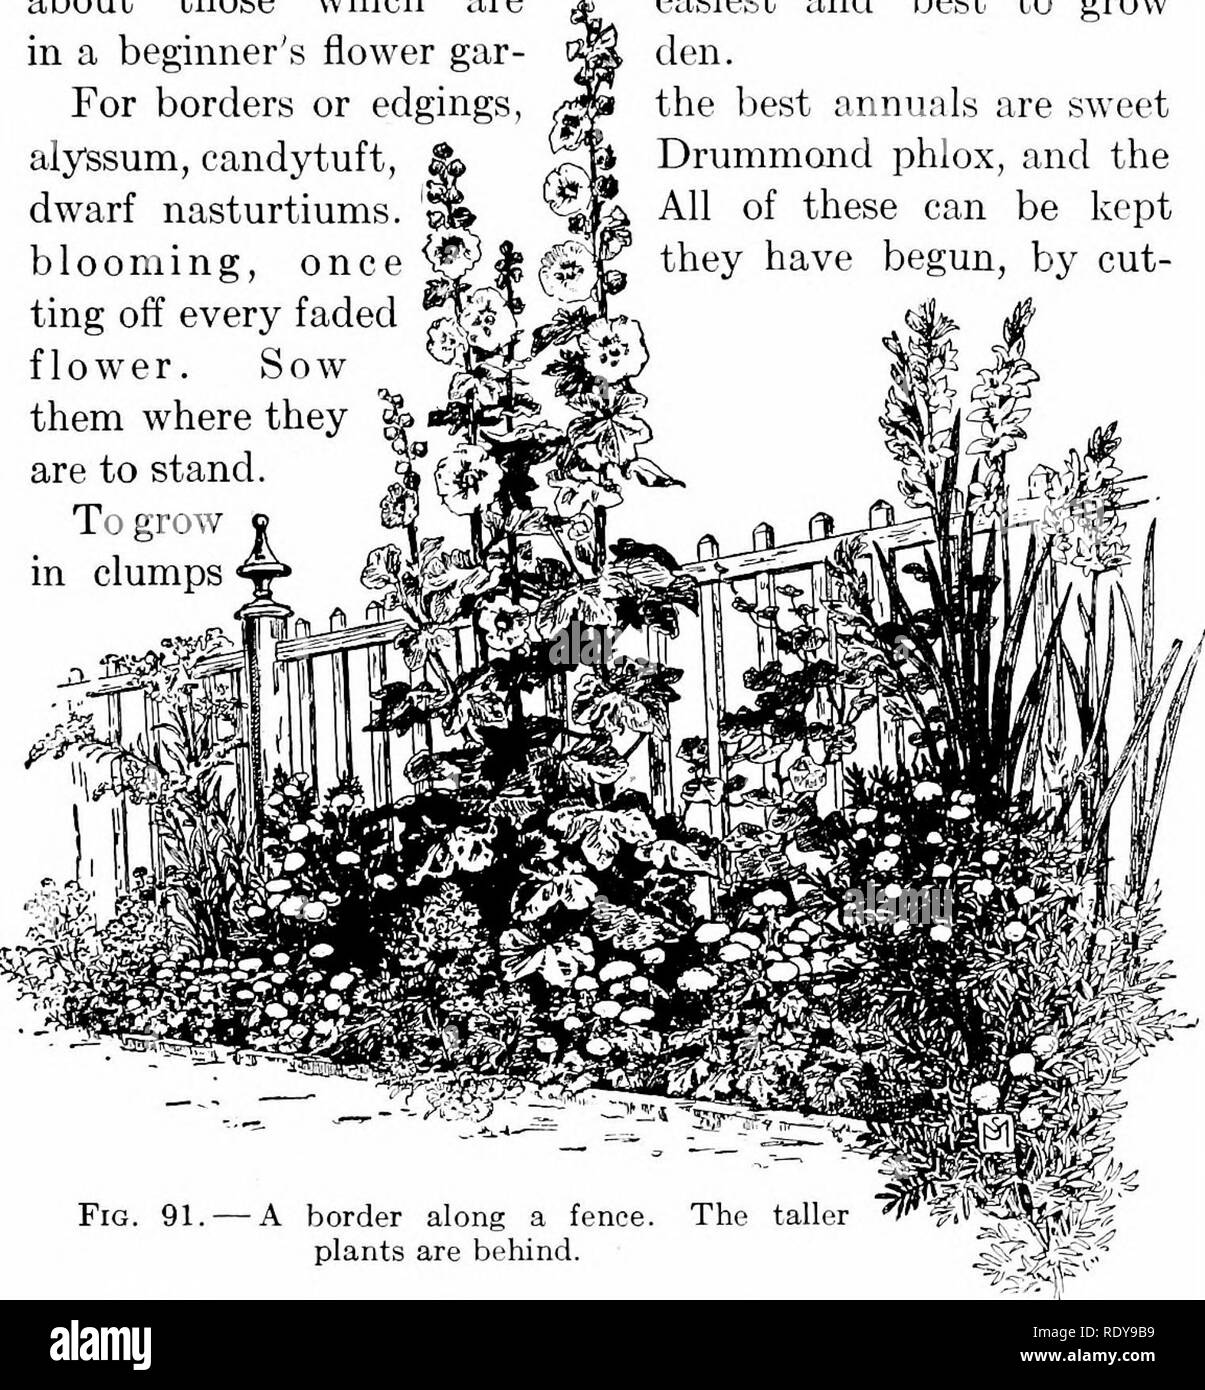 . The beginner's garden book; a textbook for the upper grammar grades. Gardening. PLANNING THE GARDEN 179 In the planting list will be found more than I can here say about the different flowers, but I wish to speak briefly about those which are in a beginner's flower gar- For borders or edgings, alyssum, candytuft, dwarf nasturtiums, blooming, once ^ ting off every faded flower. Sow them where they are to stand. To grow in clumps easiest and best to grow den. the best annuals are sweet Drummond phlox, and the All of these can be kept they have begun, by cut-. -A border along a fence, plants ar Stock Photo